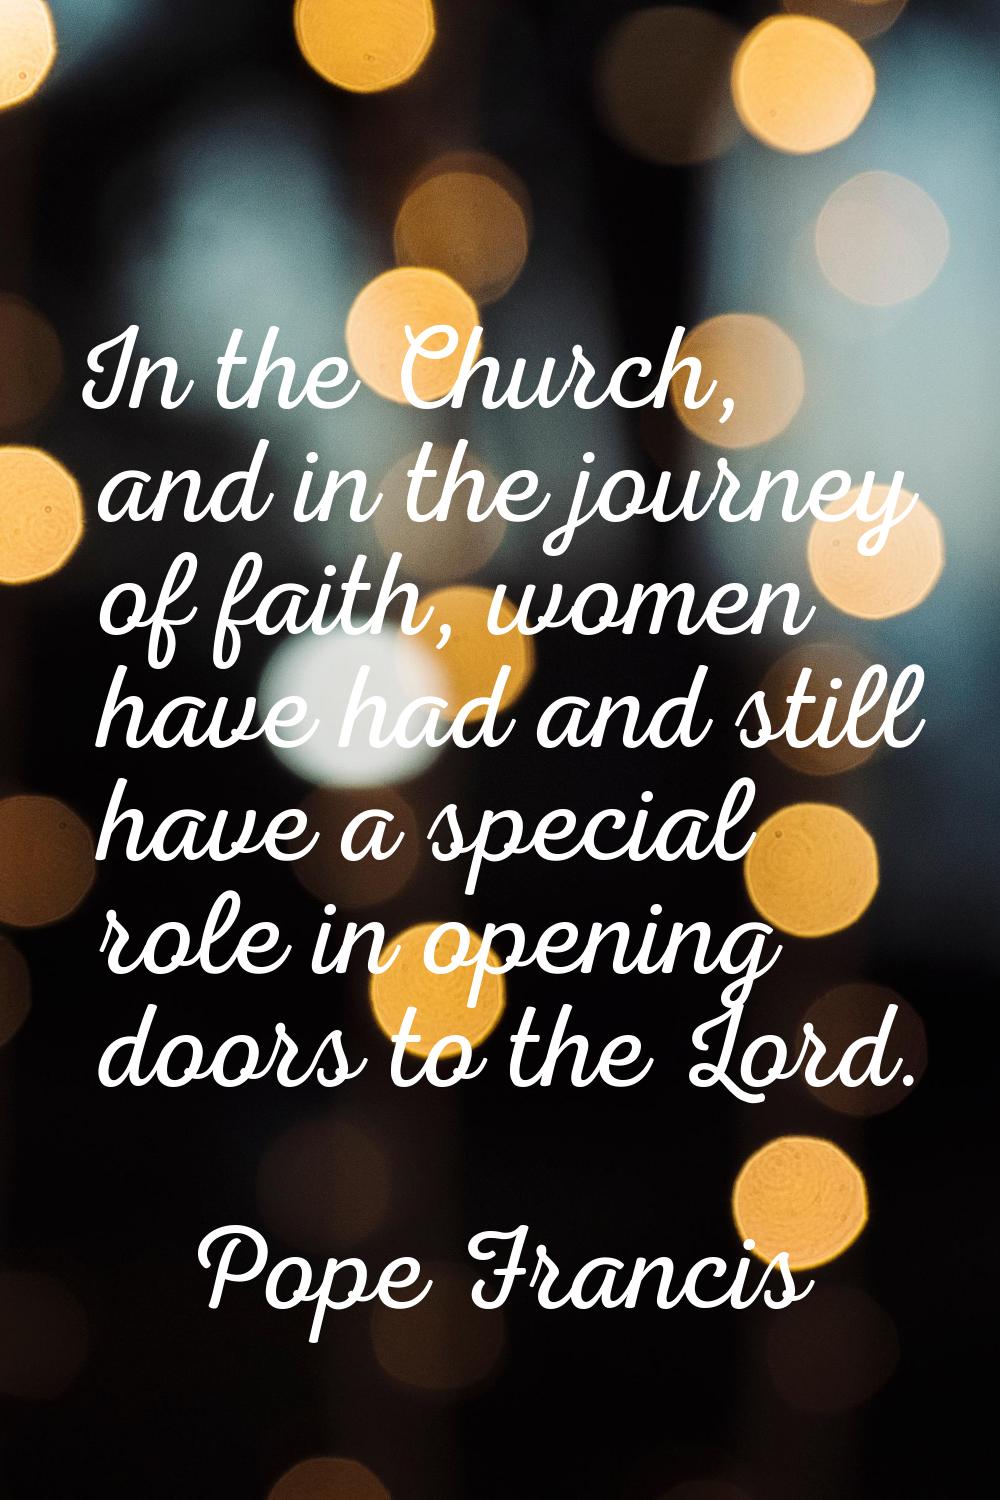 In the Church, and in the journey of faith, women have had and still have a special role in opening